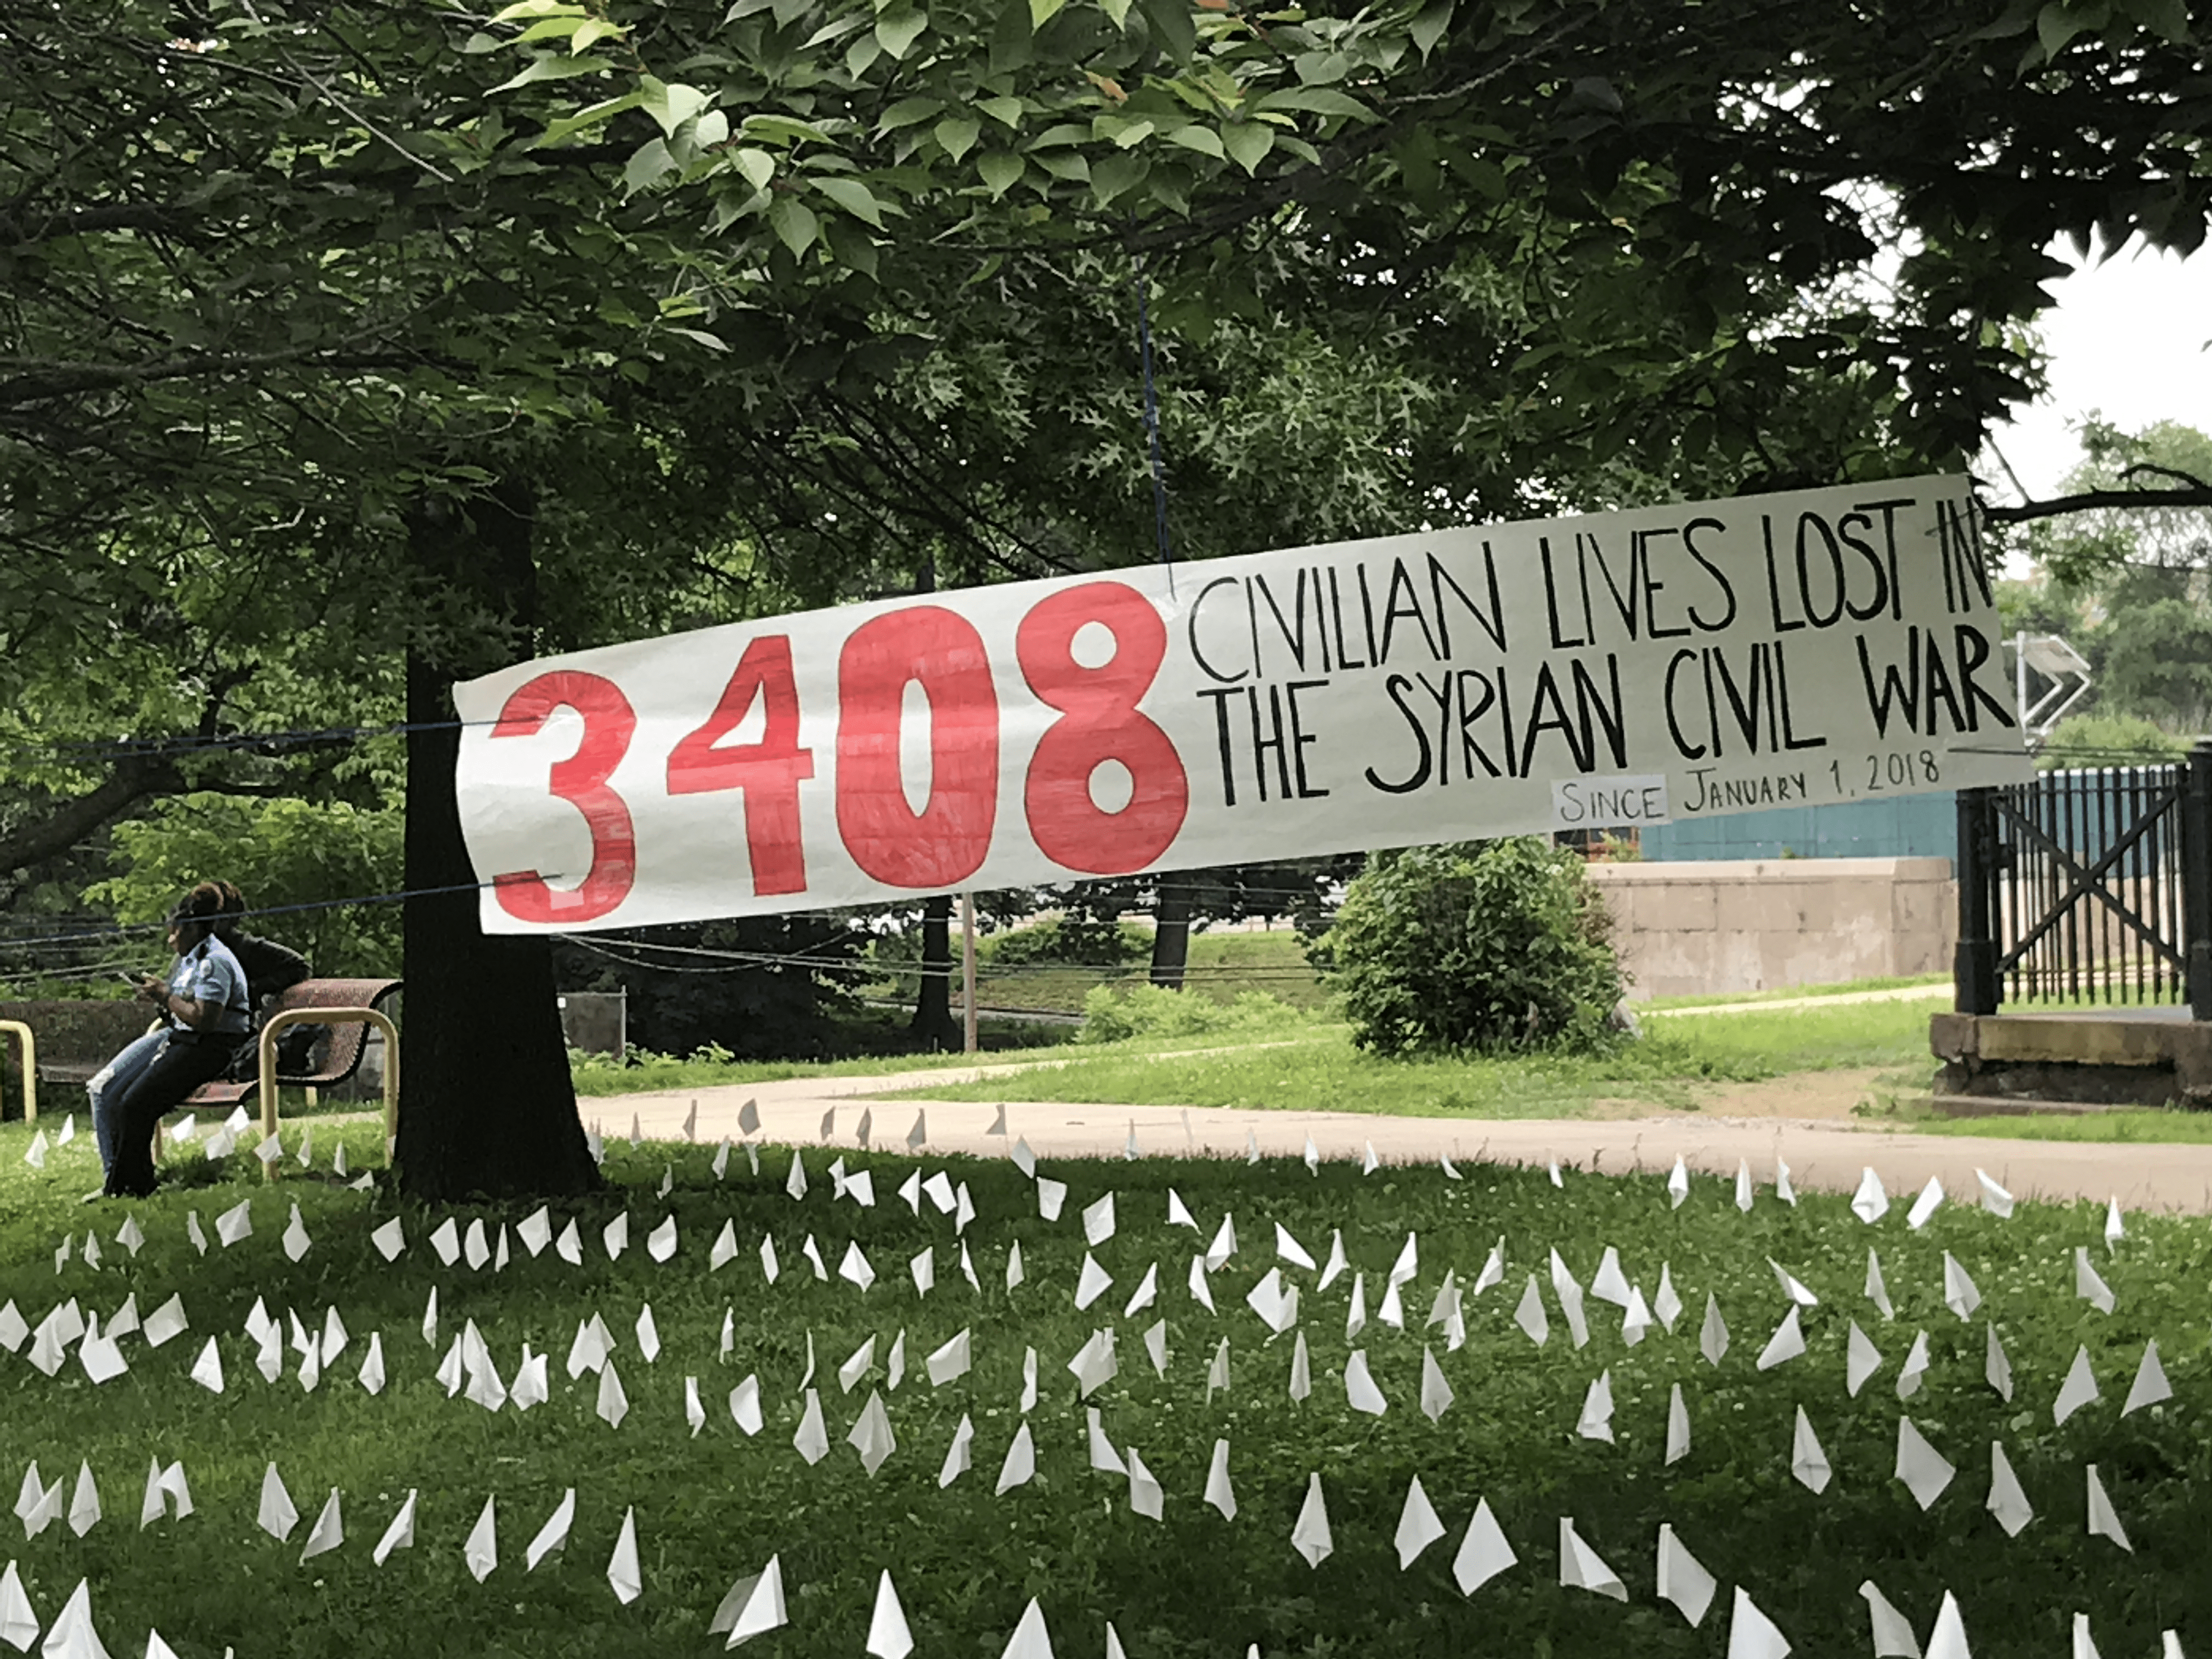 The visual installation of white flags was one of many projects Central High School students worked on to educate their community on the Arab Spring. Image by Ken Hung. Pennsylvania, 2018. 